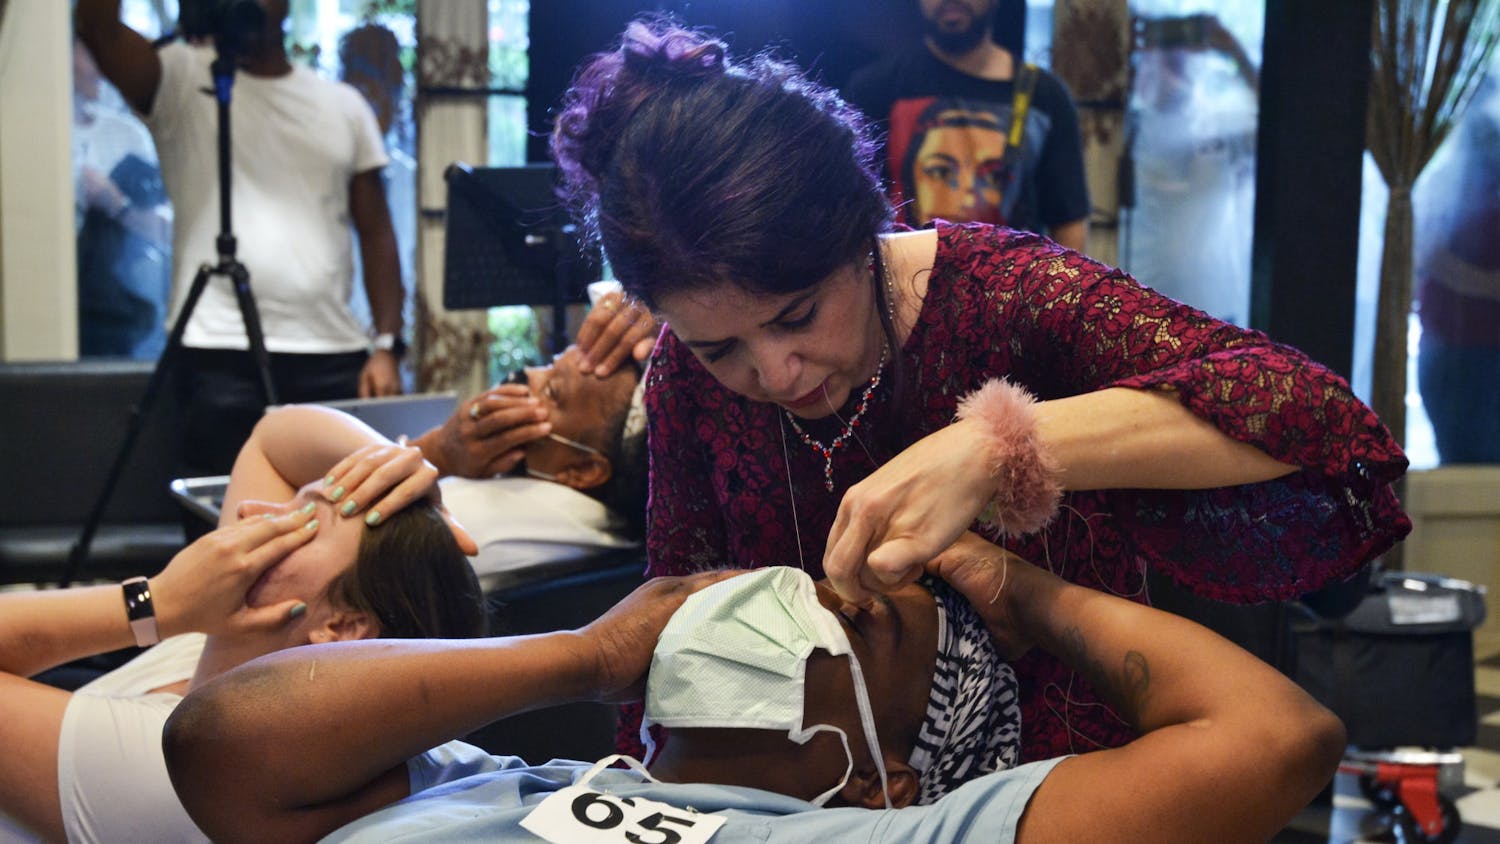 Ziba Ahmadi, owner of Salon Ziba in Gainesville, threads Shavonne Carter's eyebrows, and breaks the previous record for most eyebrows threaded by one person in one hour on Wednesday, June 16, 2021.